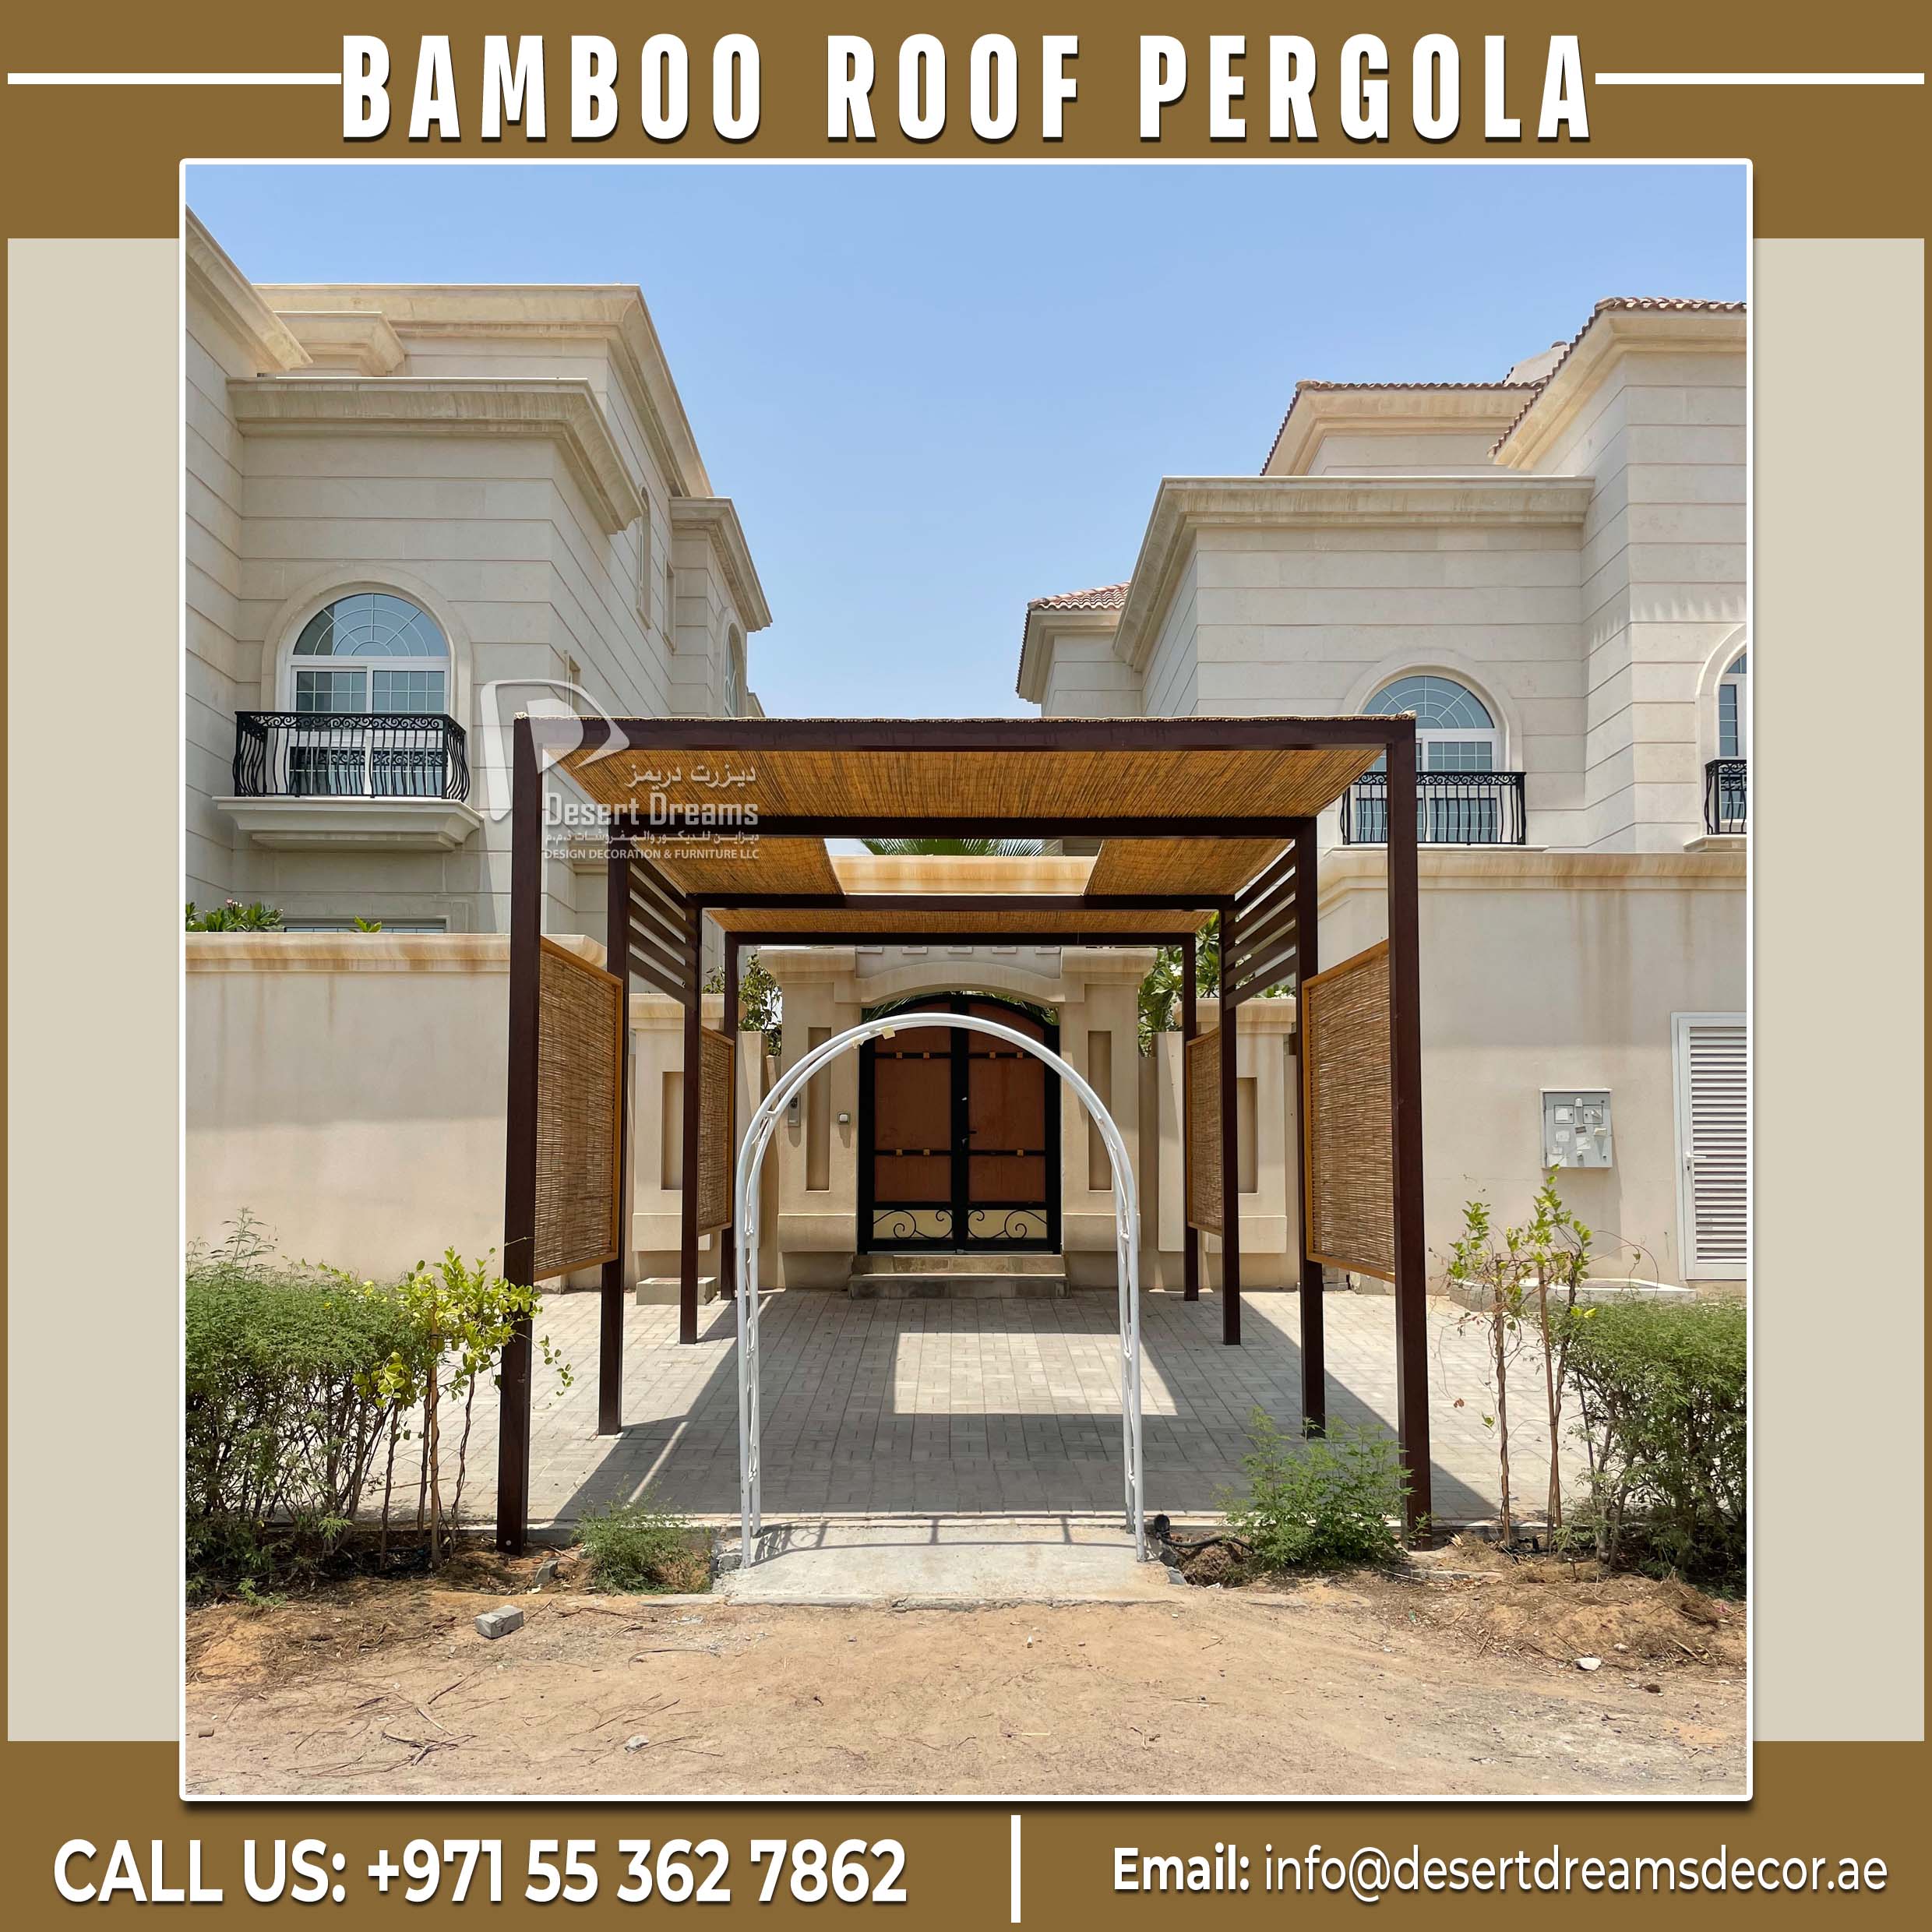 Supply and Install Bamboo Roofing Pergola in UAE (4).jpg